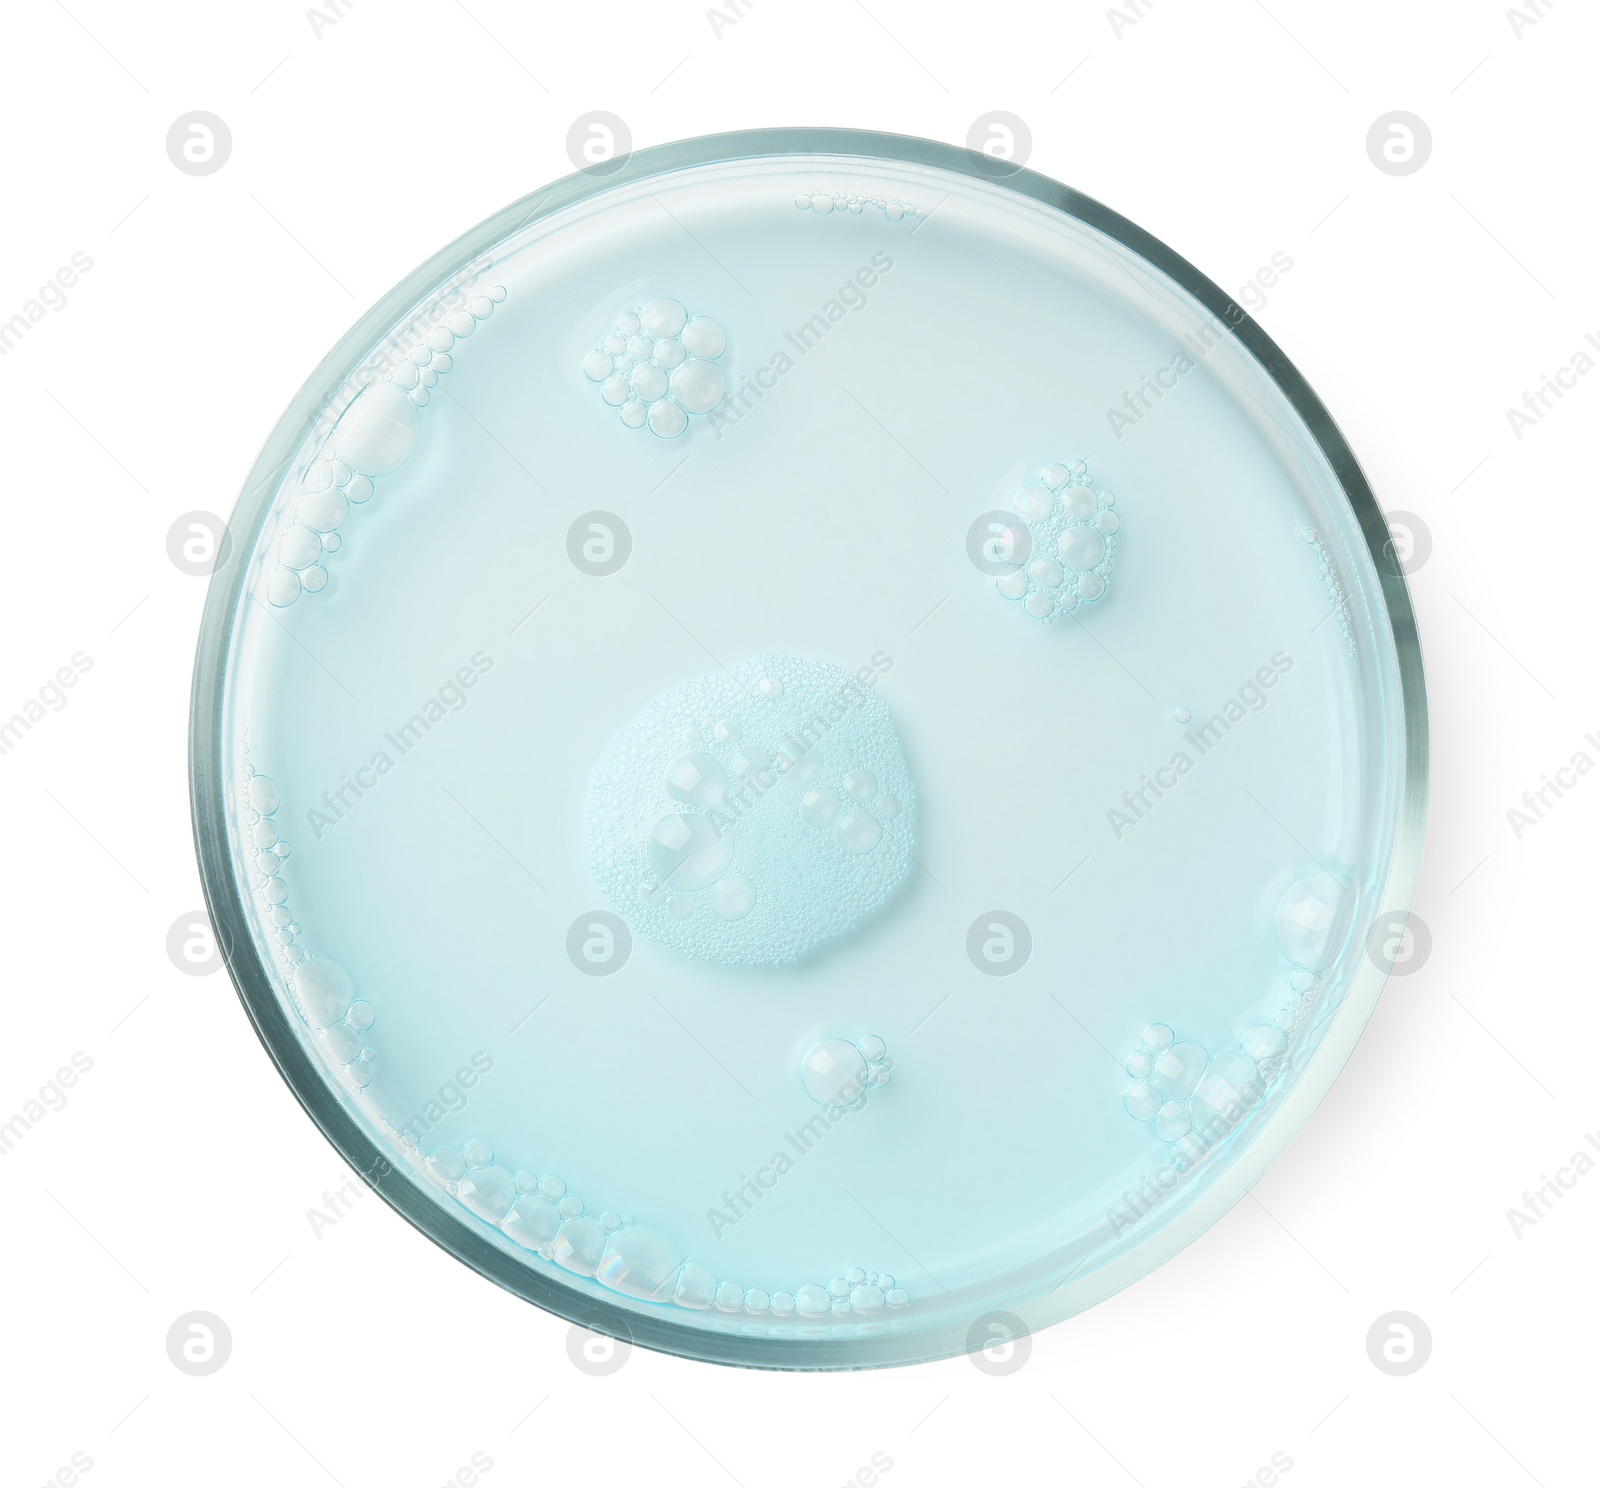 Photo of Petri dish with light blue liquid sample on white background, top view